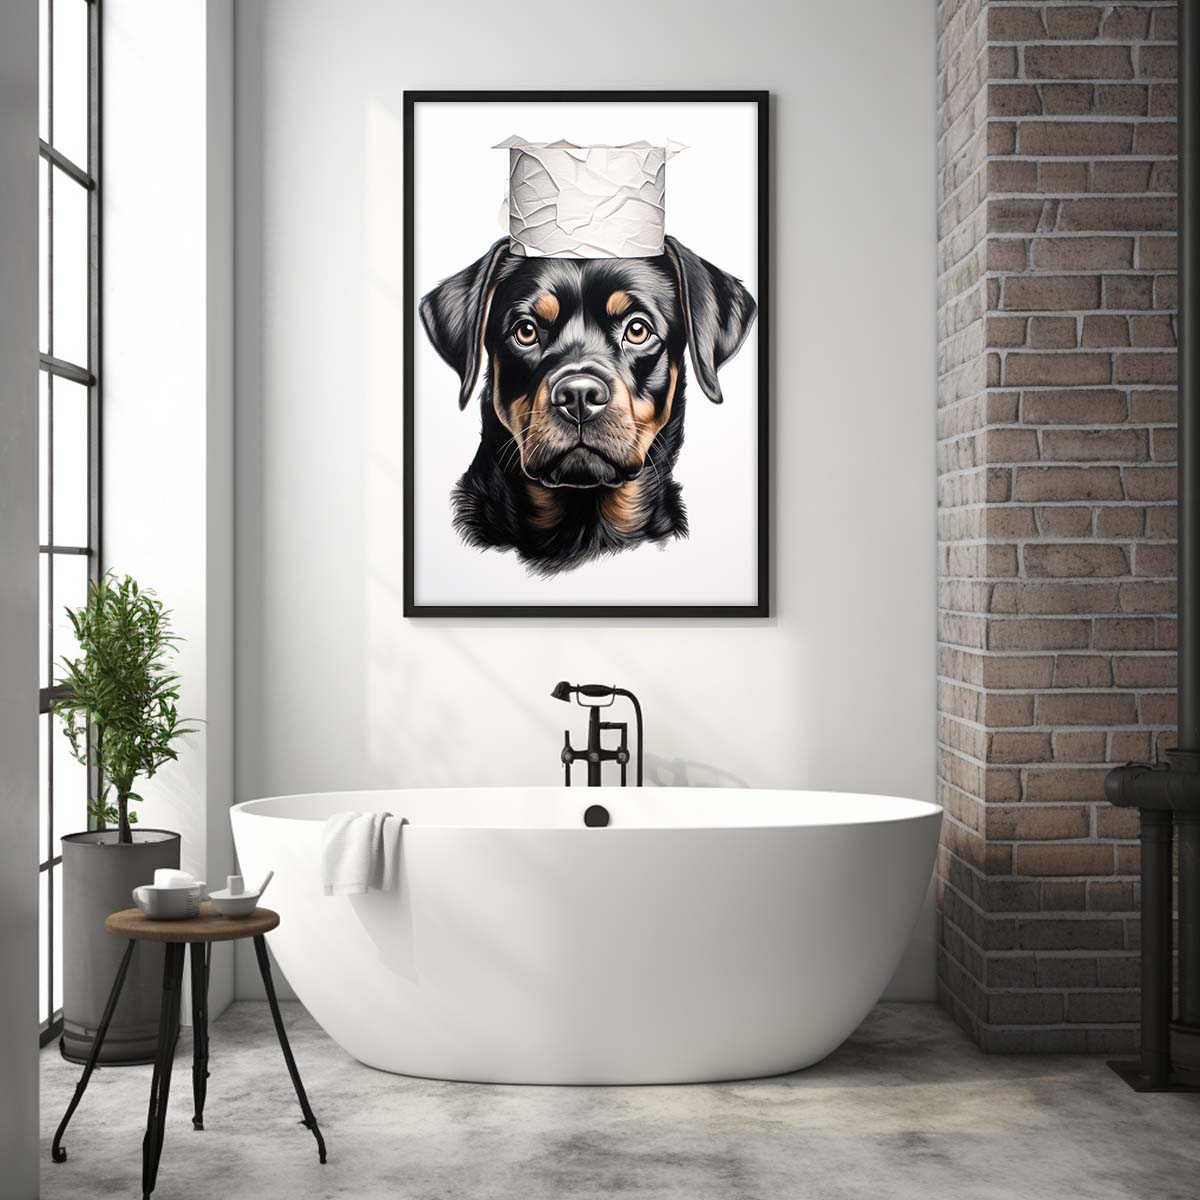 Rottweiler With Toilet Paper, Canvas Or Poster, Funny Dog Art, Bathroom Wall Decor, Home Decor, Bathroom Wall Art, Dog Wall Decor, Animal Decor, Pet Gift, Pet Illustration, Digital Download